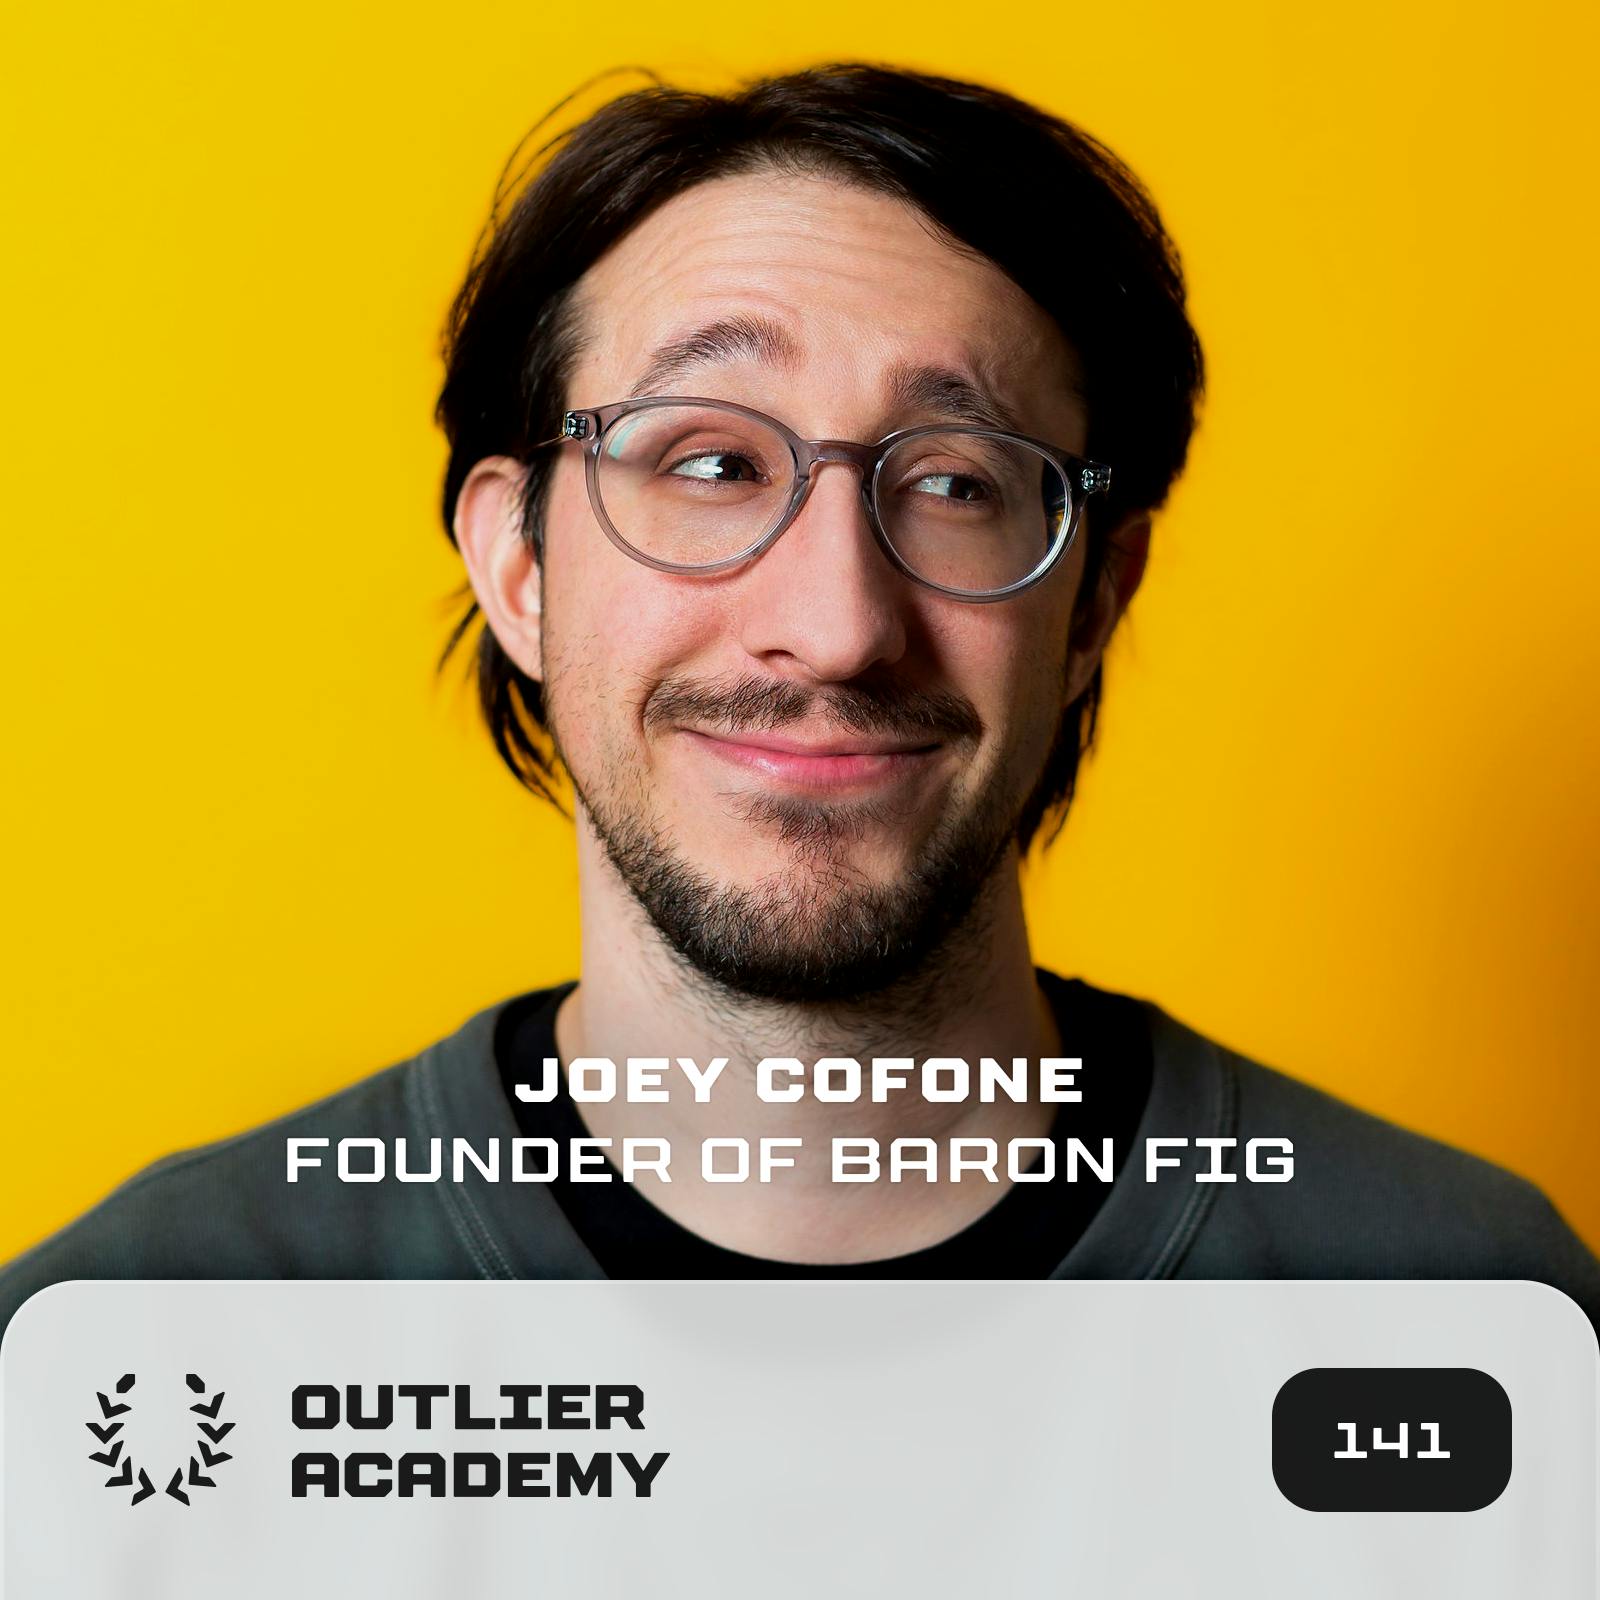 Trailer – #141 Joey Cofone, Founder & CEO of Baronfig | Favorite Baronfig Products, Skill vs Renown, Daily Disciplines, Favorite Books, and More Image